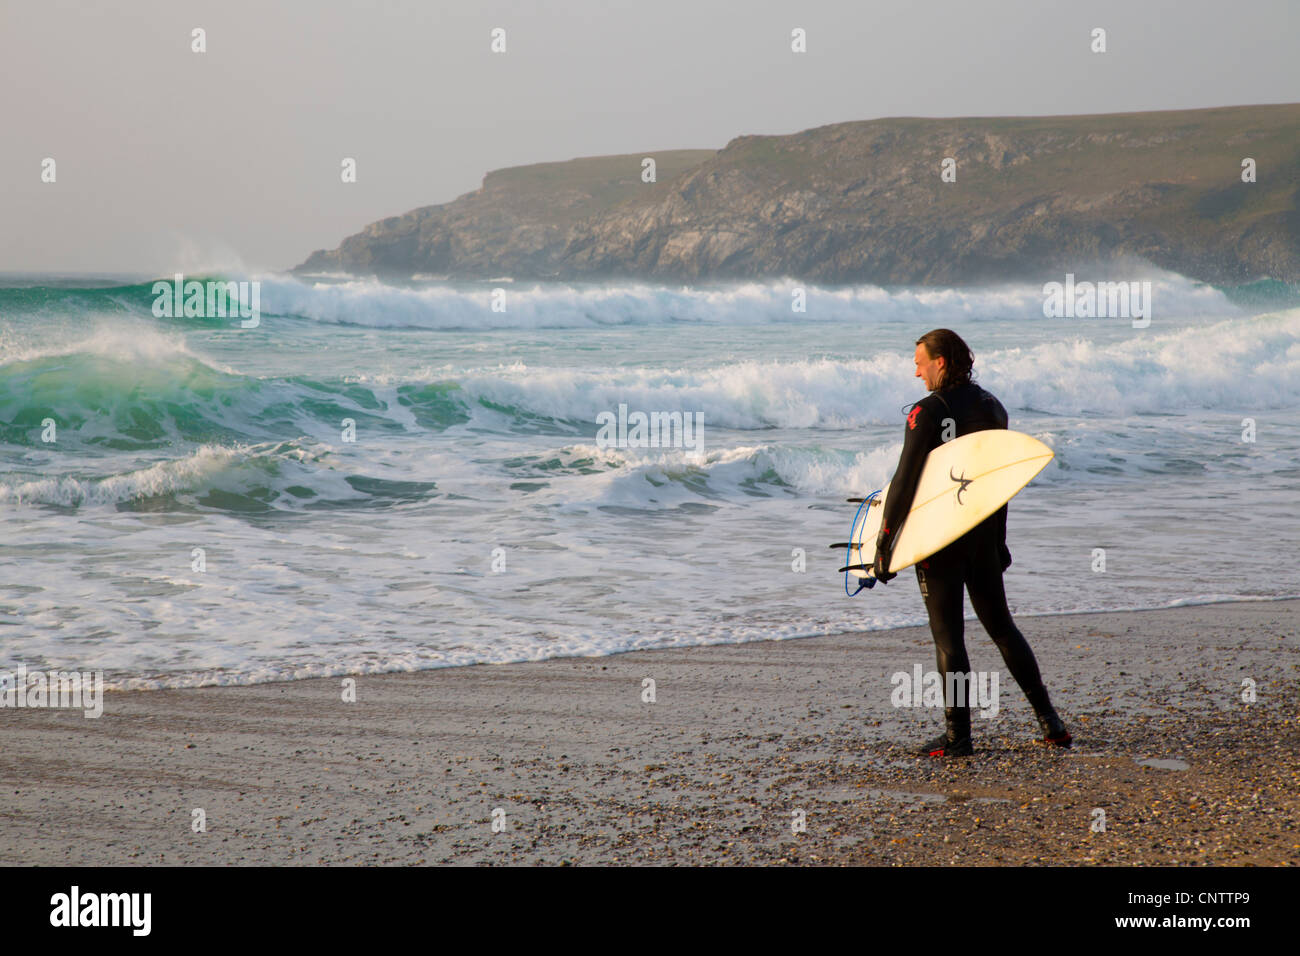 Baie de Holywell, surfer, Cornwall, UK Banque D'Images